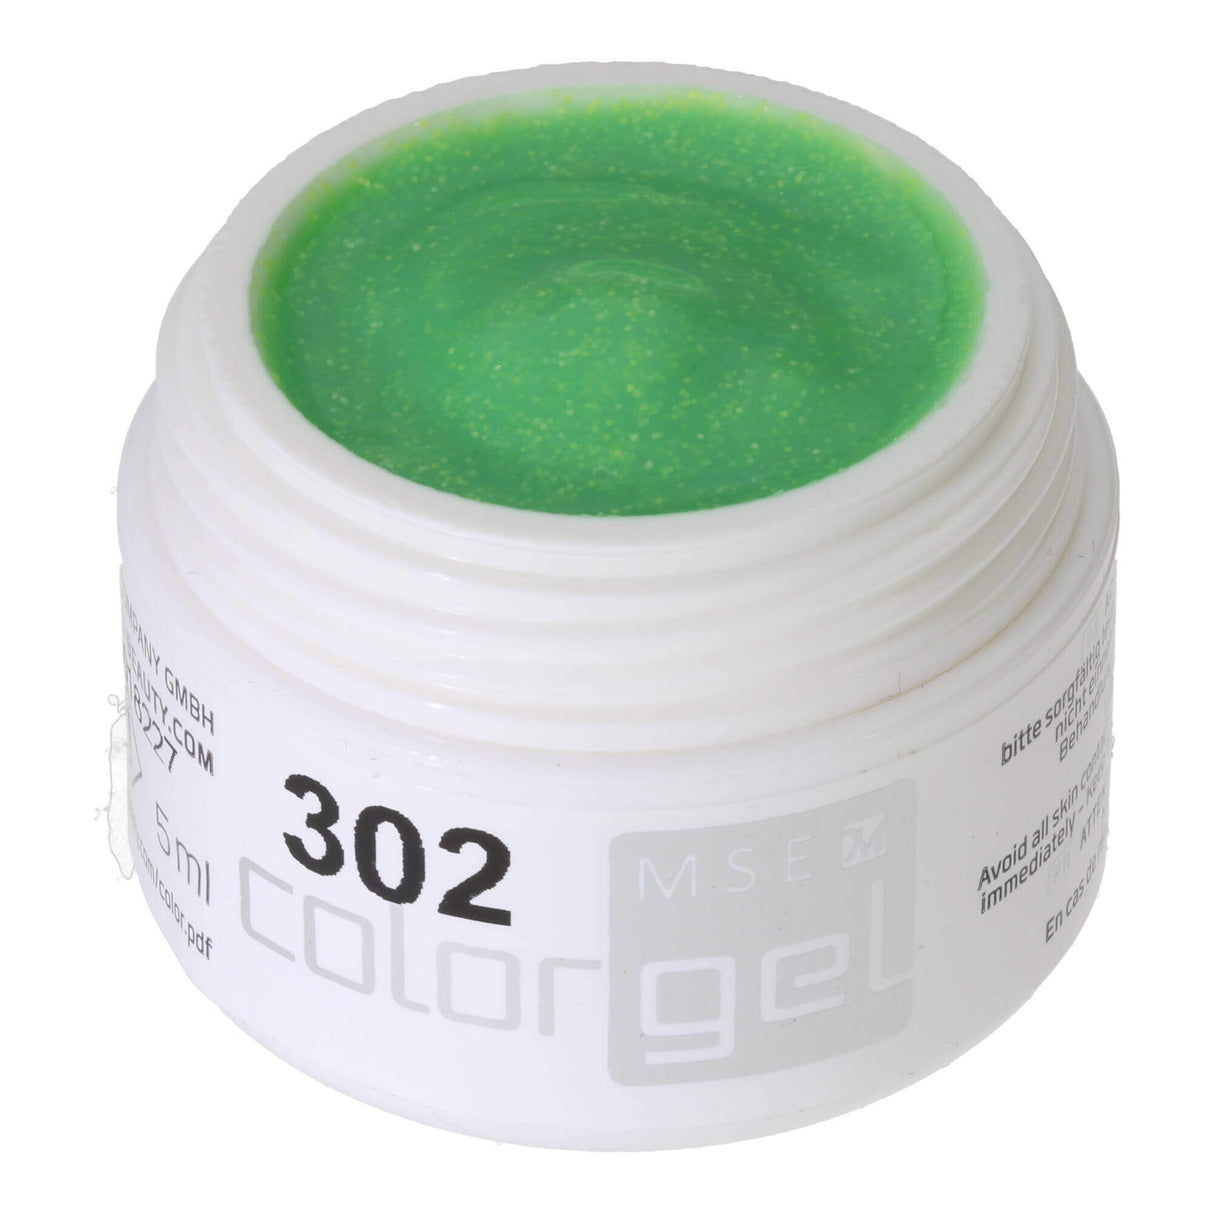 # 302 Premium GLITTER Color Gel 5ml Pale may green with blue / green glitter